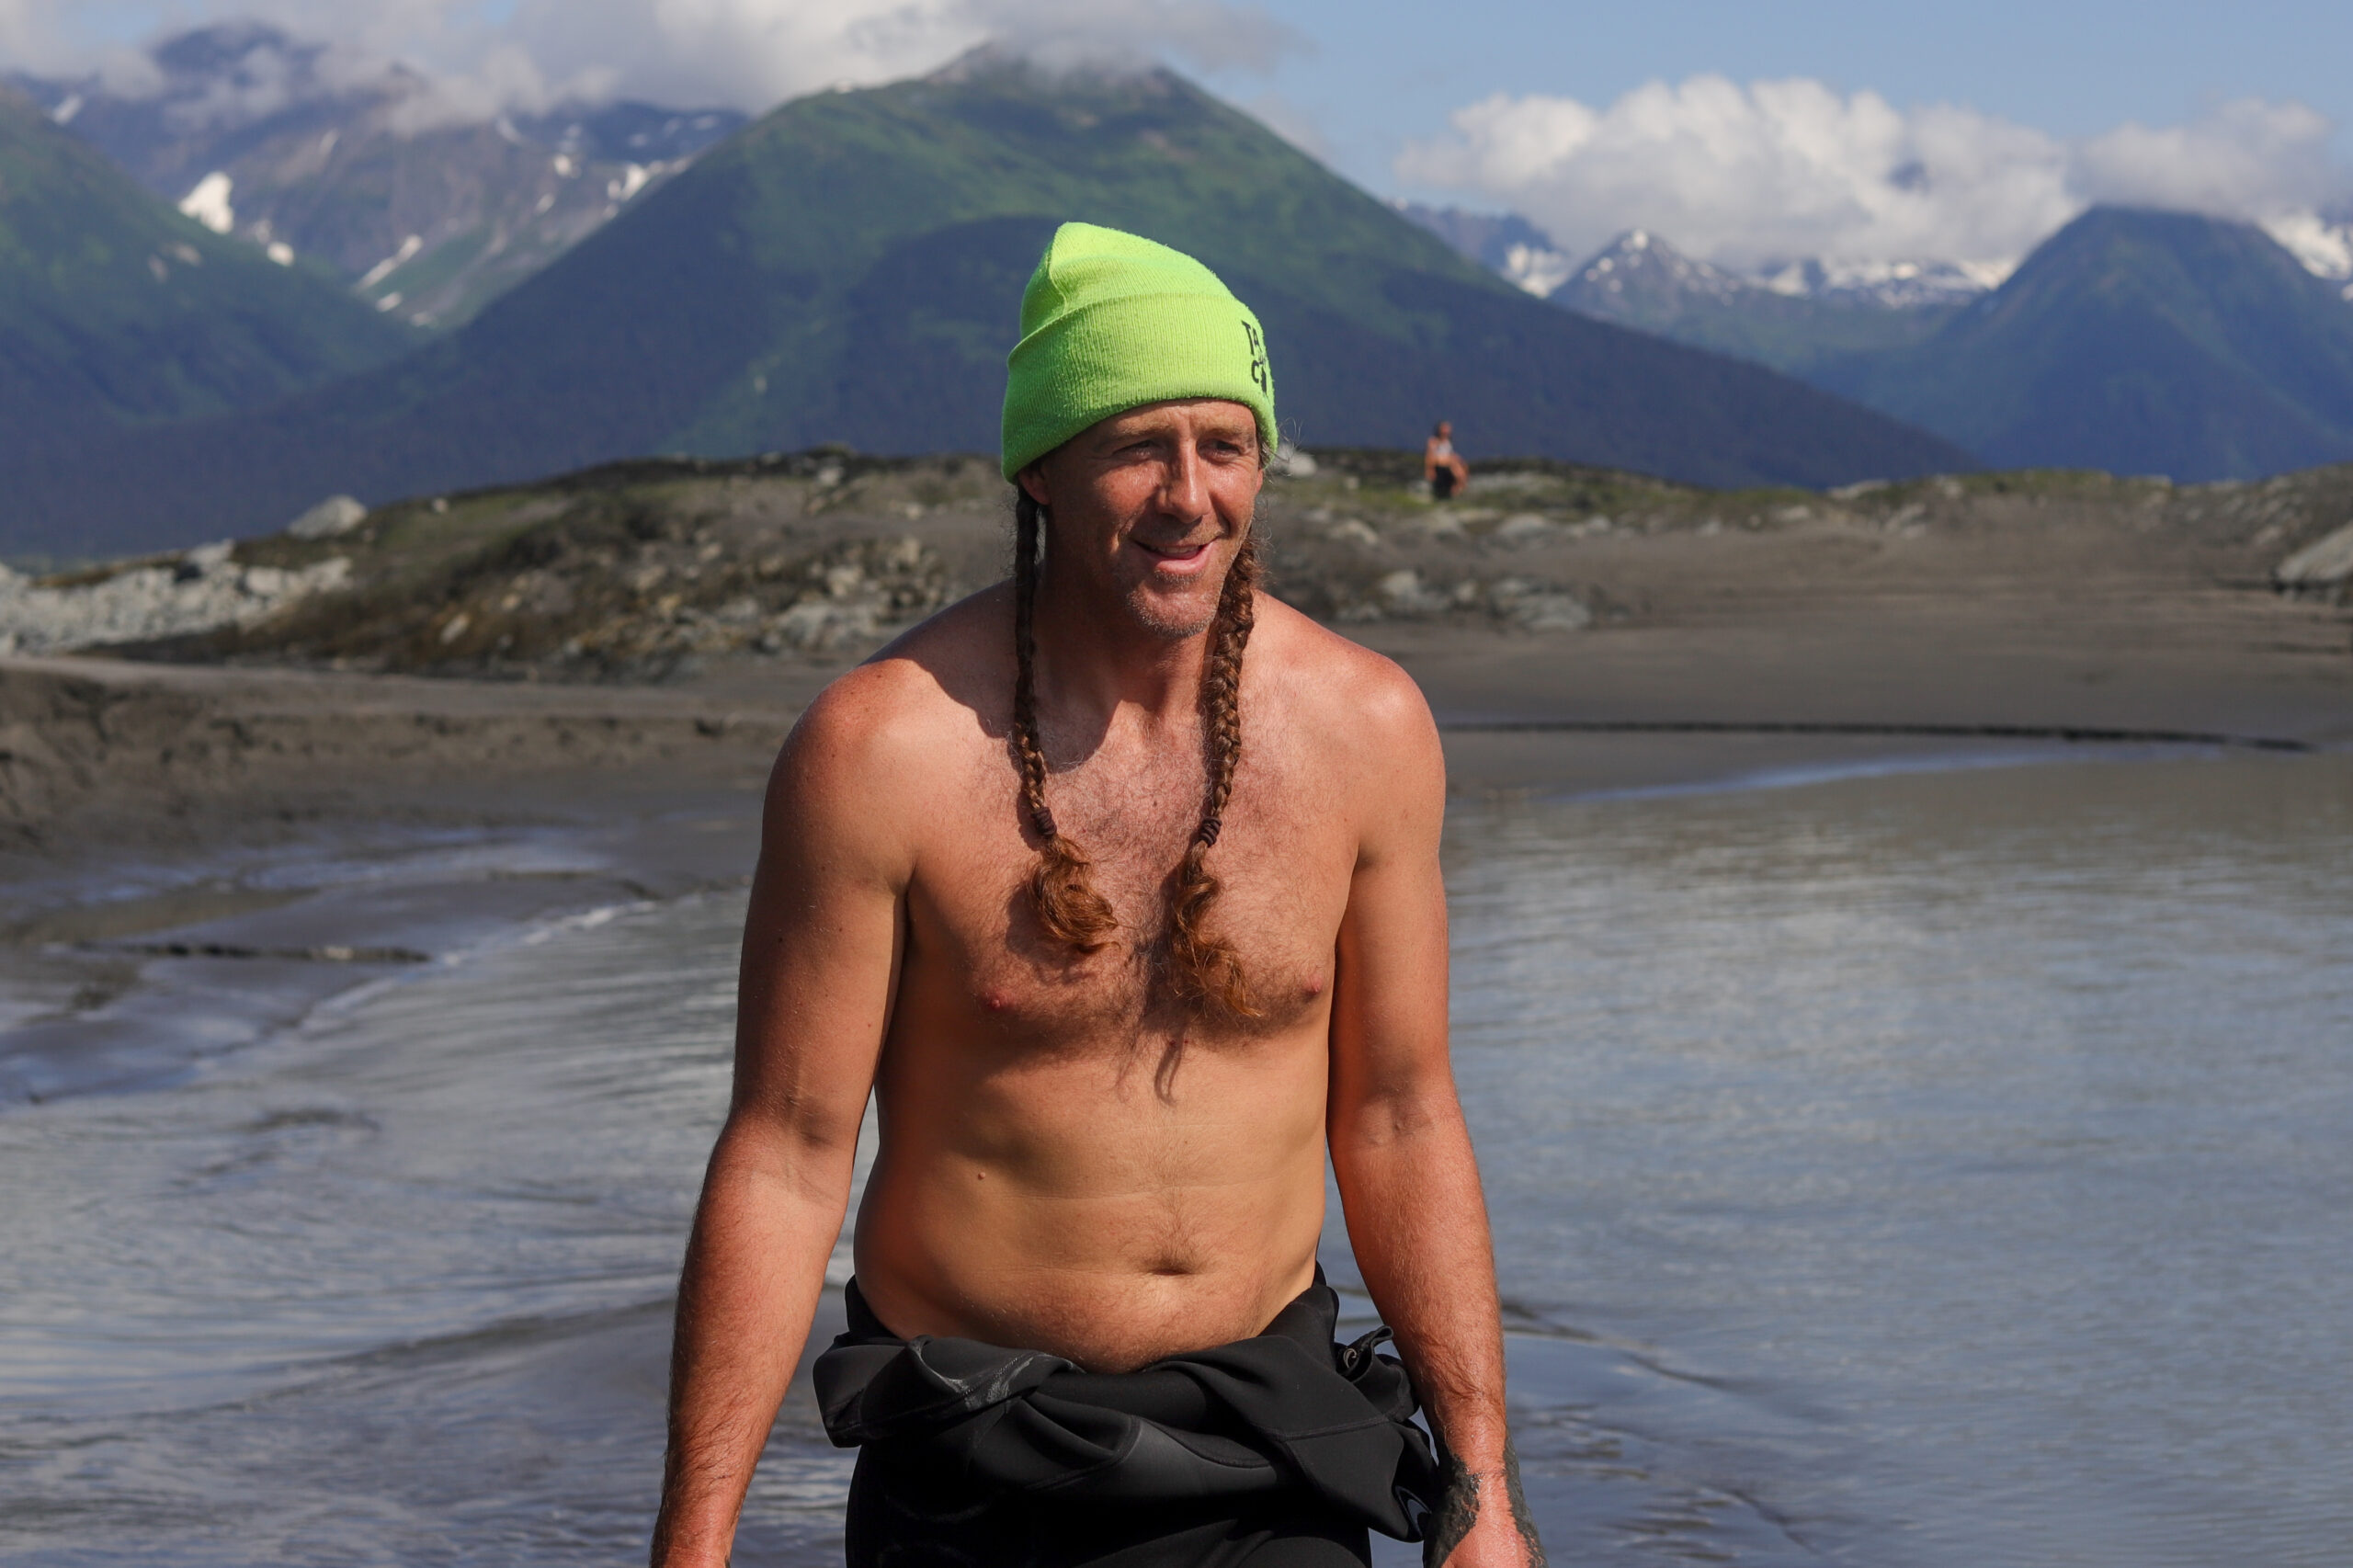 A man with a beanie, no shirt, and a wetsuit tied around his waist stands in a body of water.